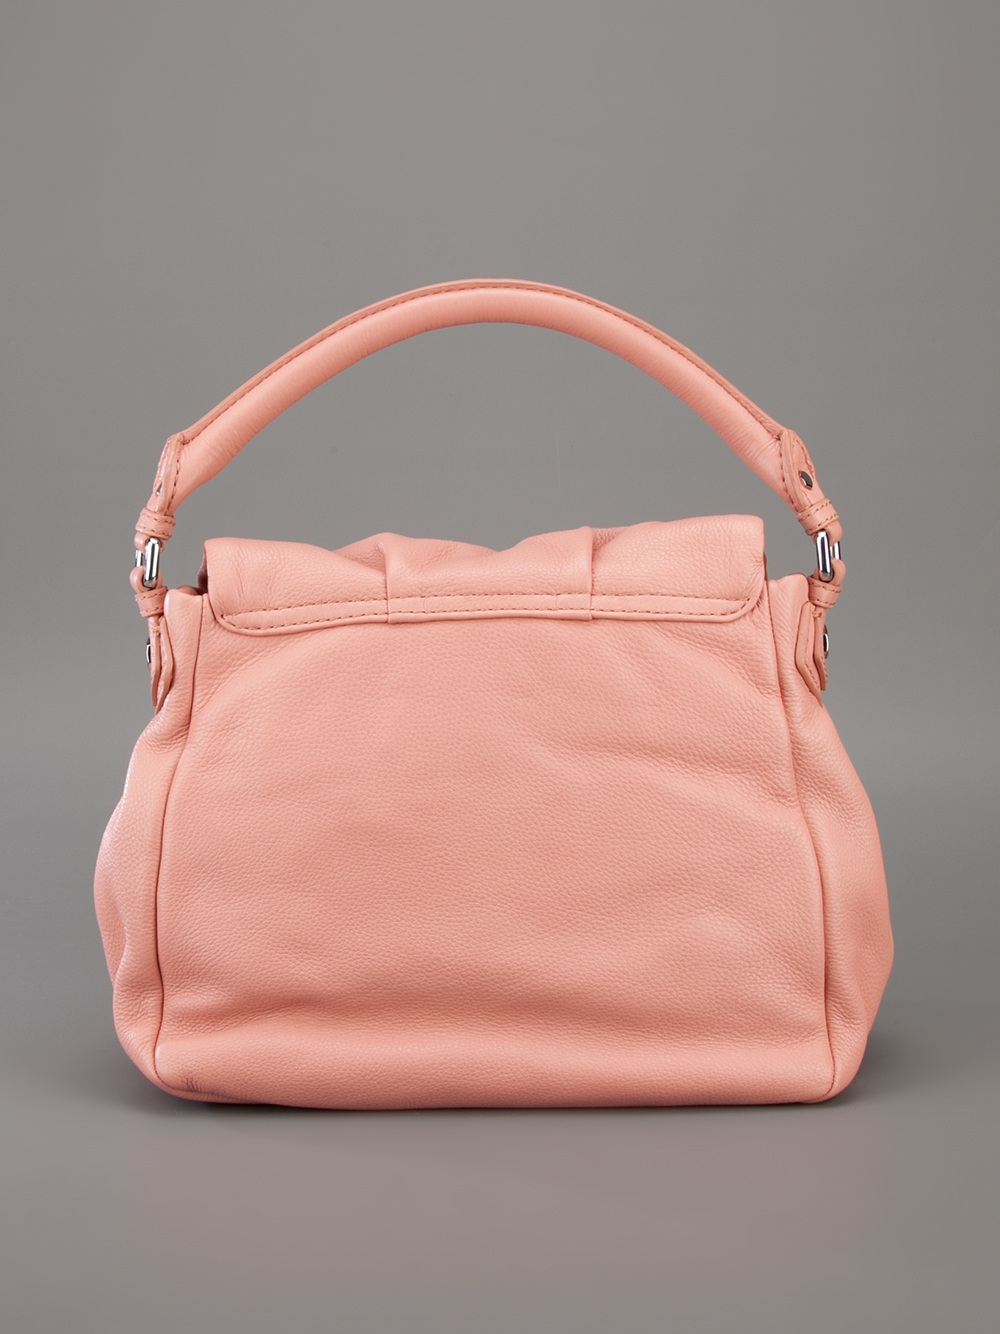 Marc By Marc Jacobs Classic Q Lil Ukita Shoulder Bag in Pink - Lyst